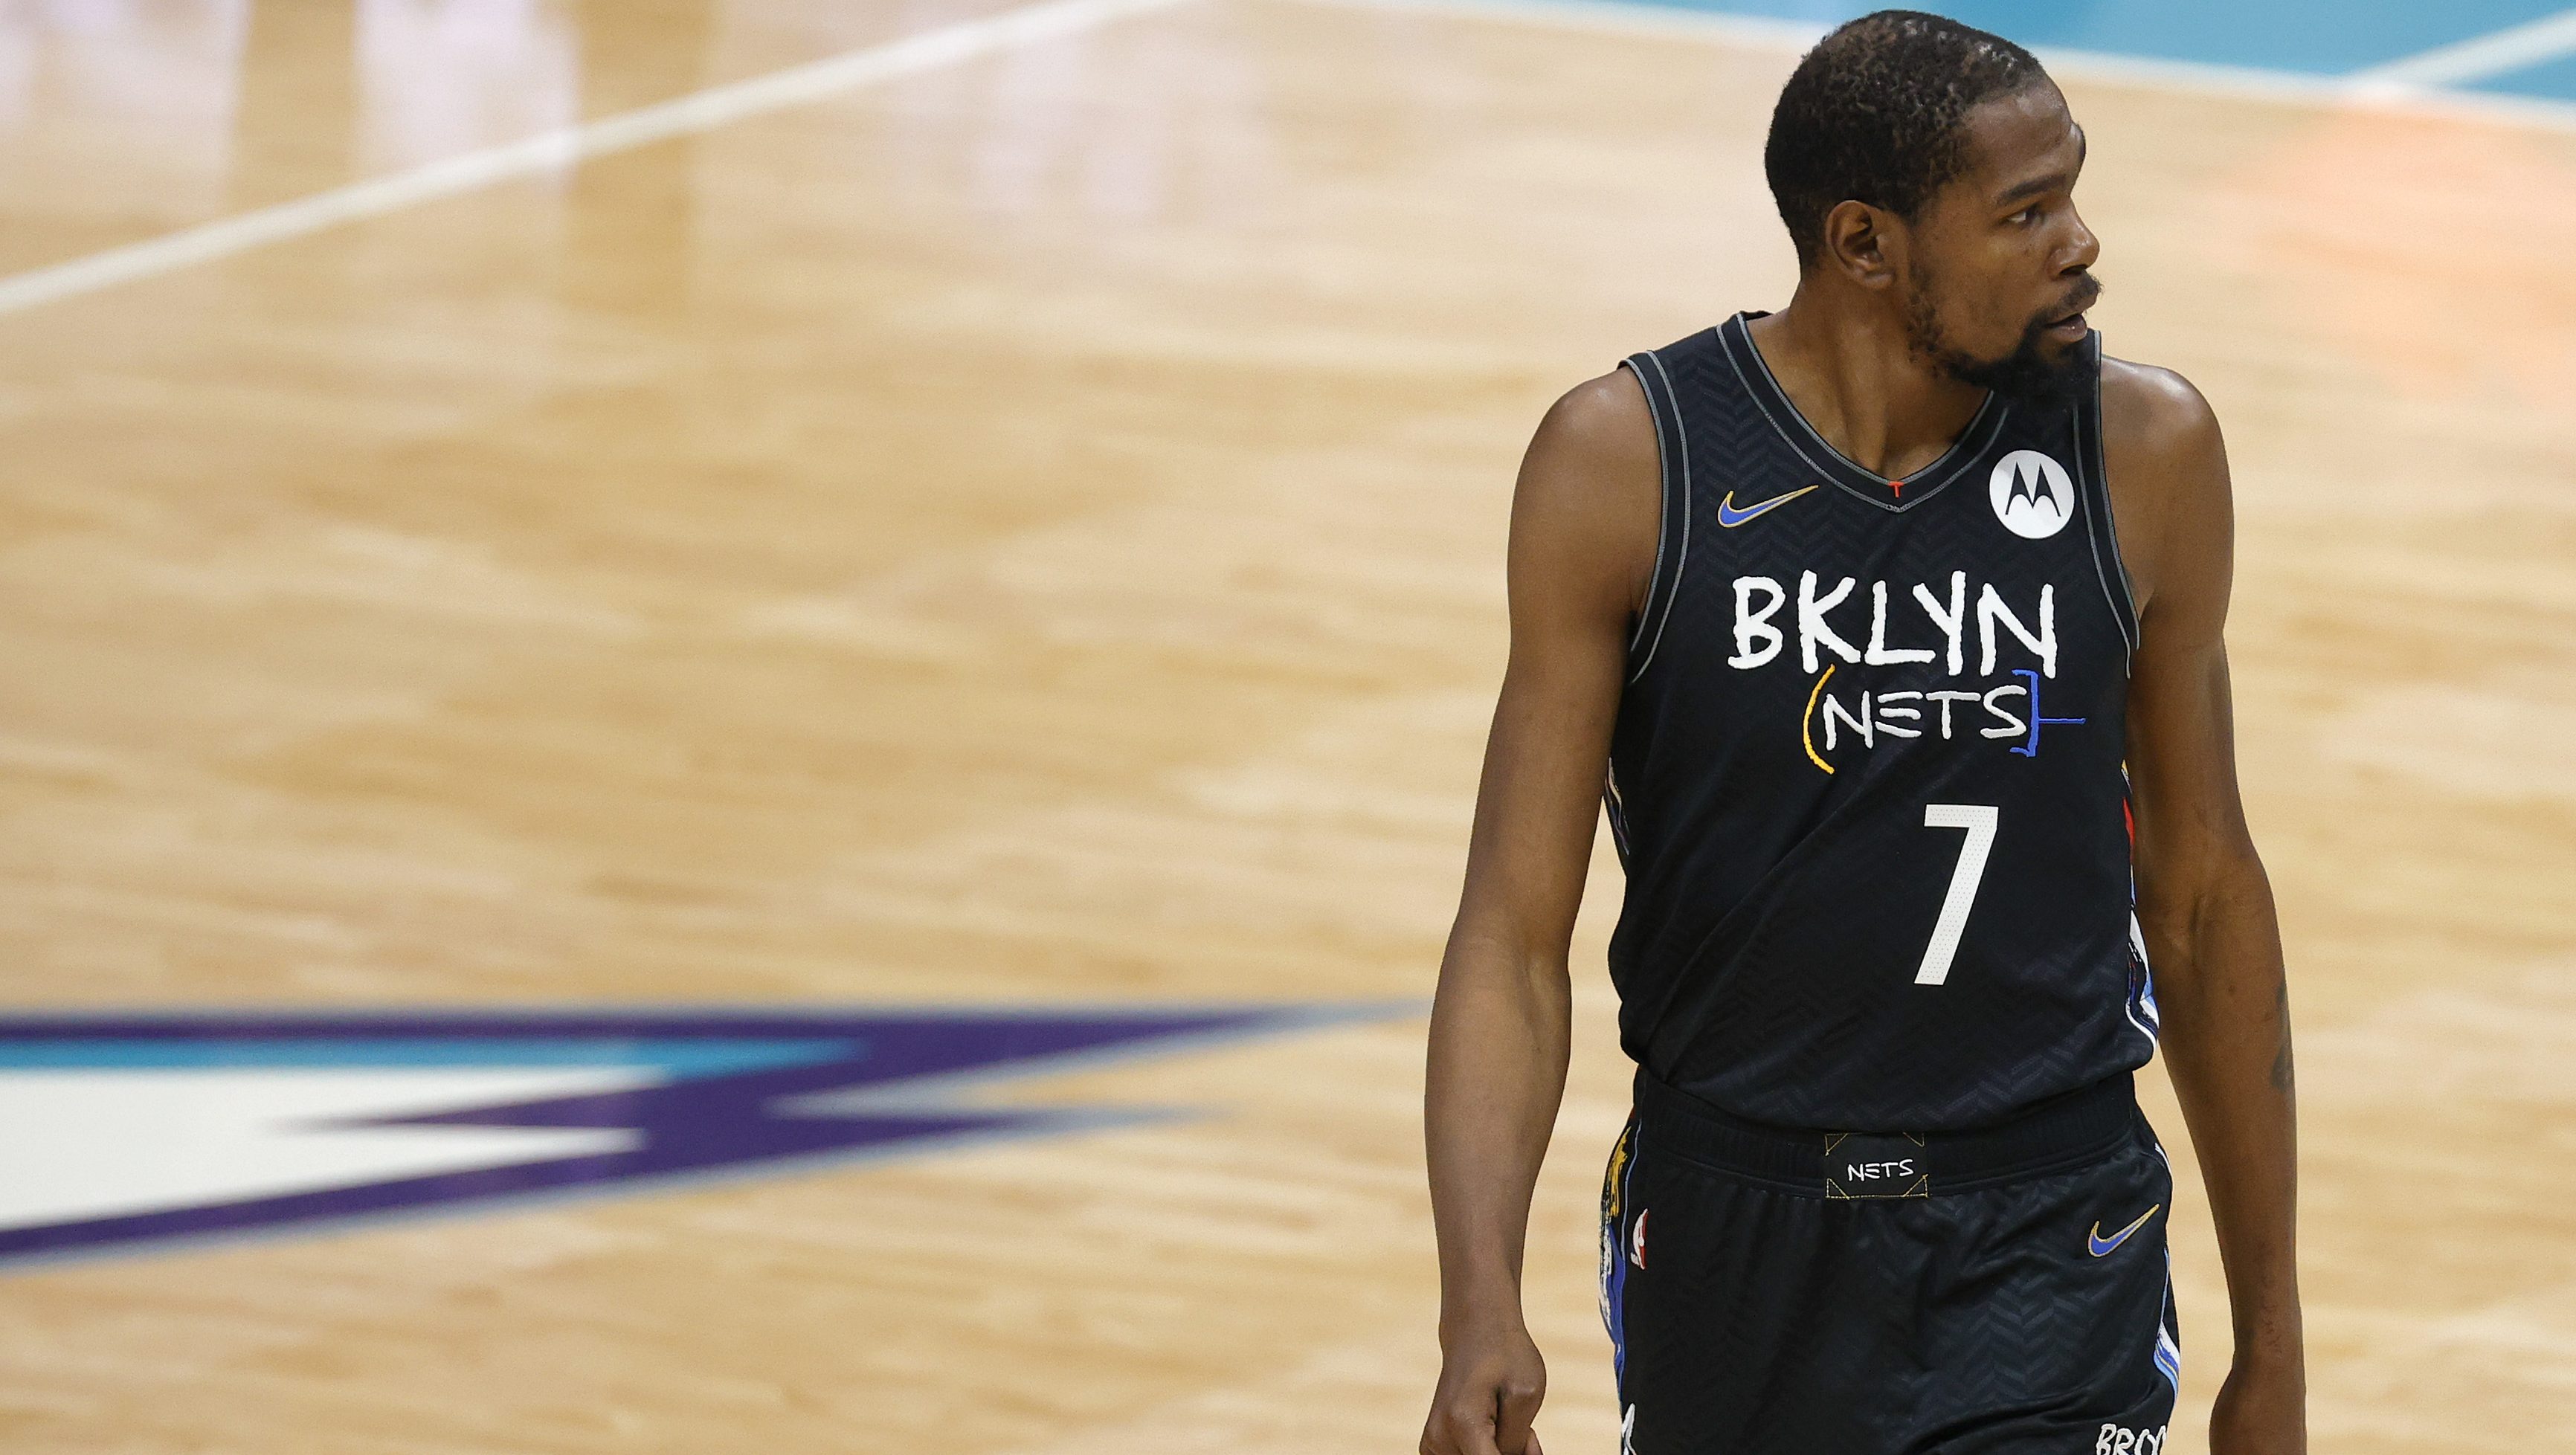 Warriors To Back Nets' Kevin Durant in Big Way